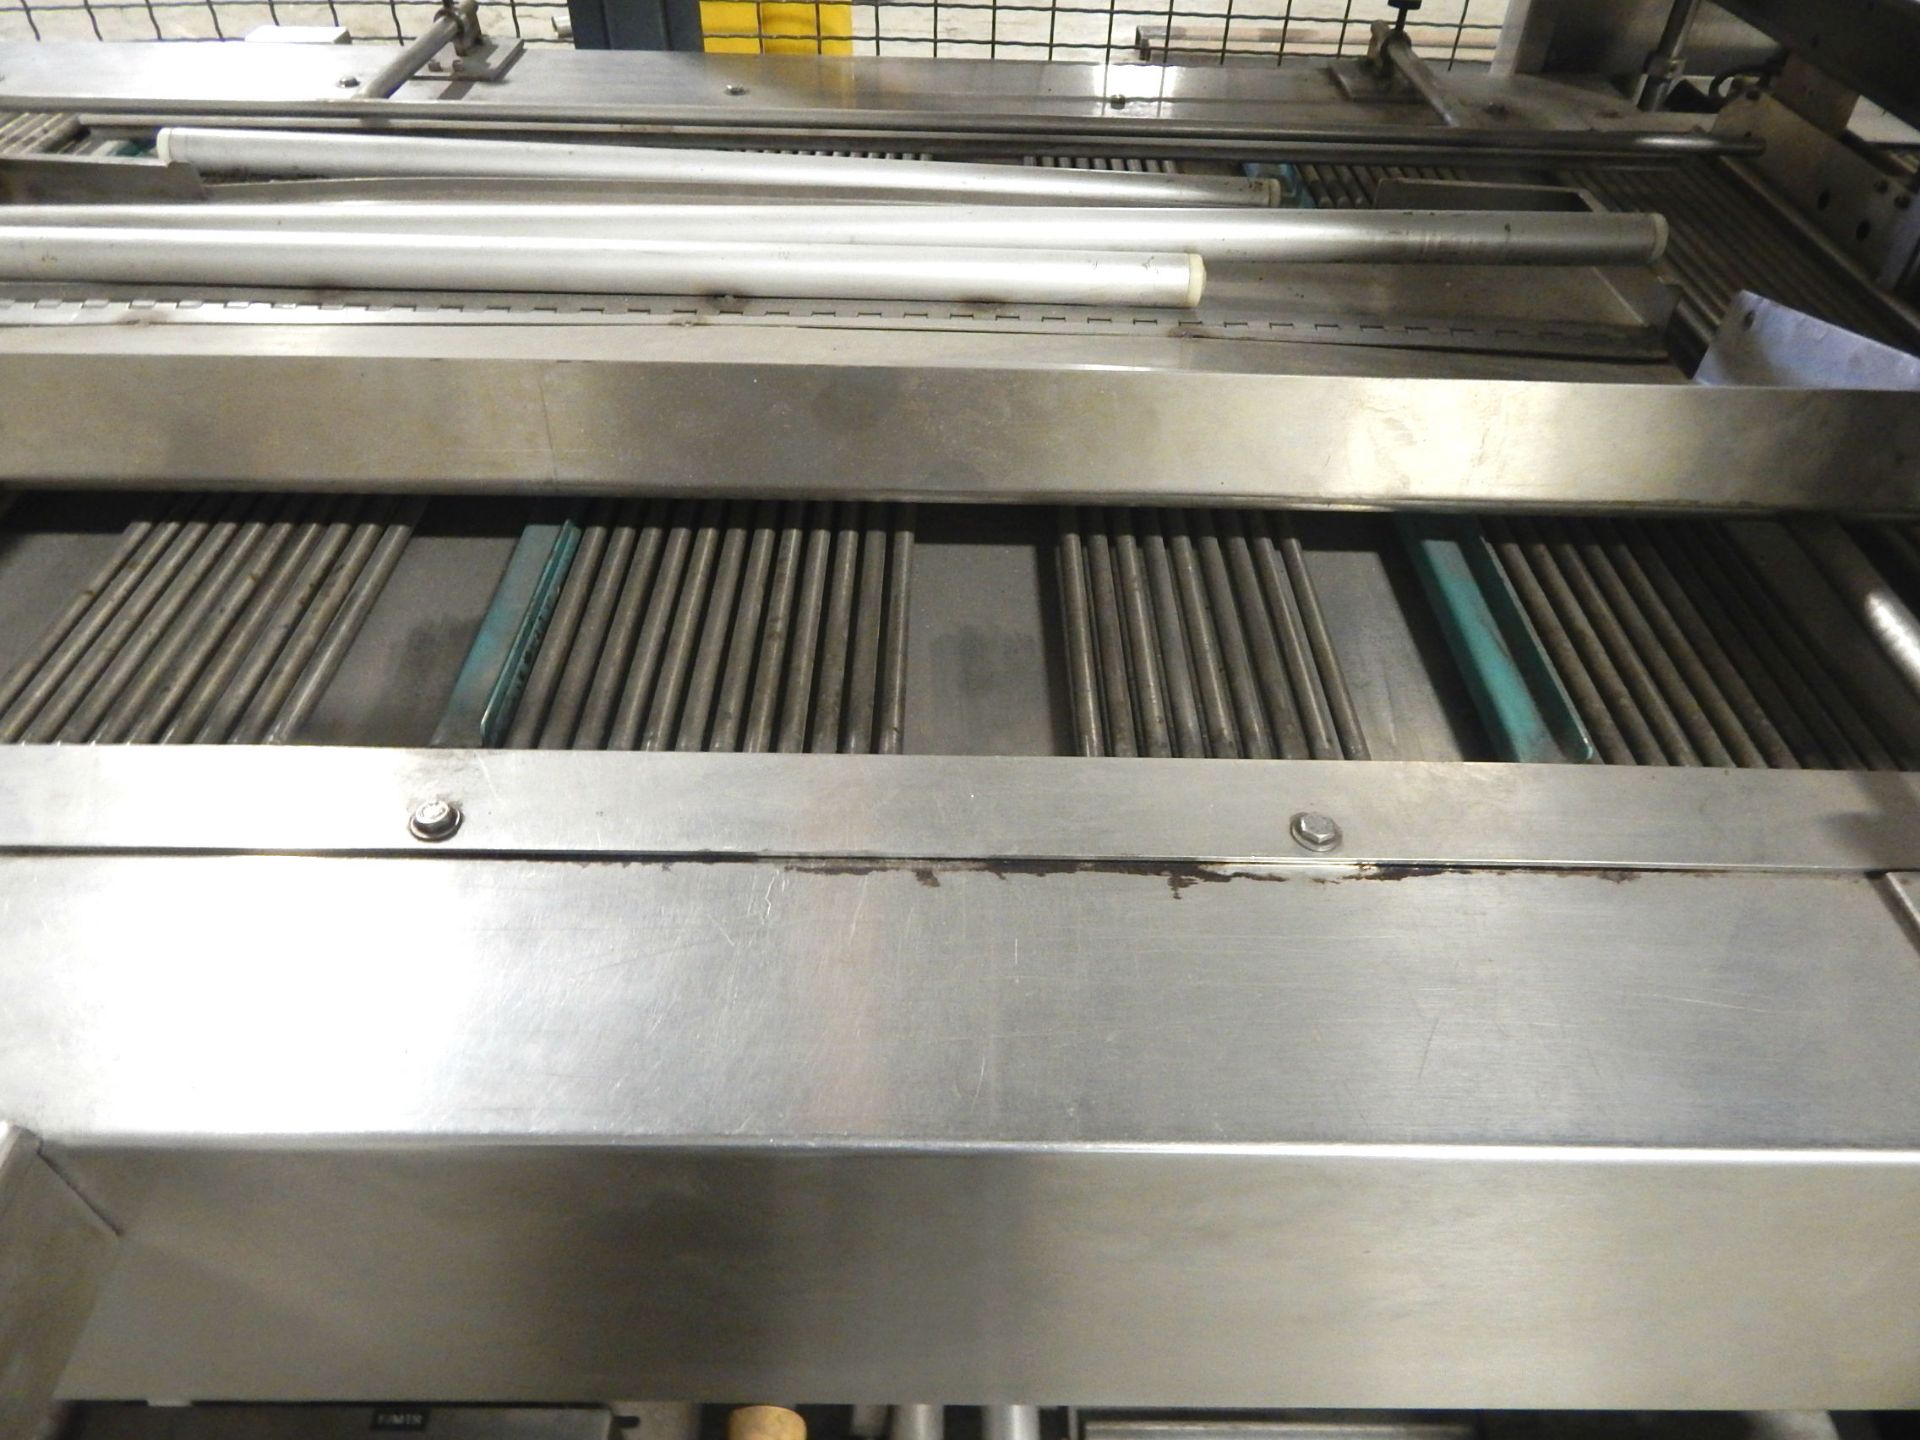 AUTOMATIC ALL STAINLESS STEEL CASE/TRAY OVERWRAPPER BY AUTOMATION PACKAGING INC. - Image 5 of 9